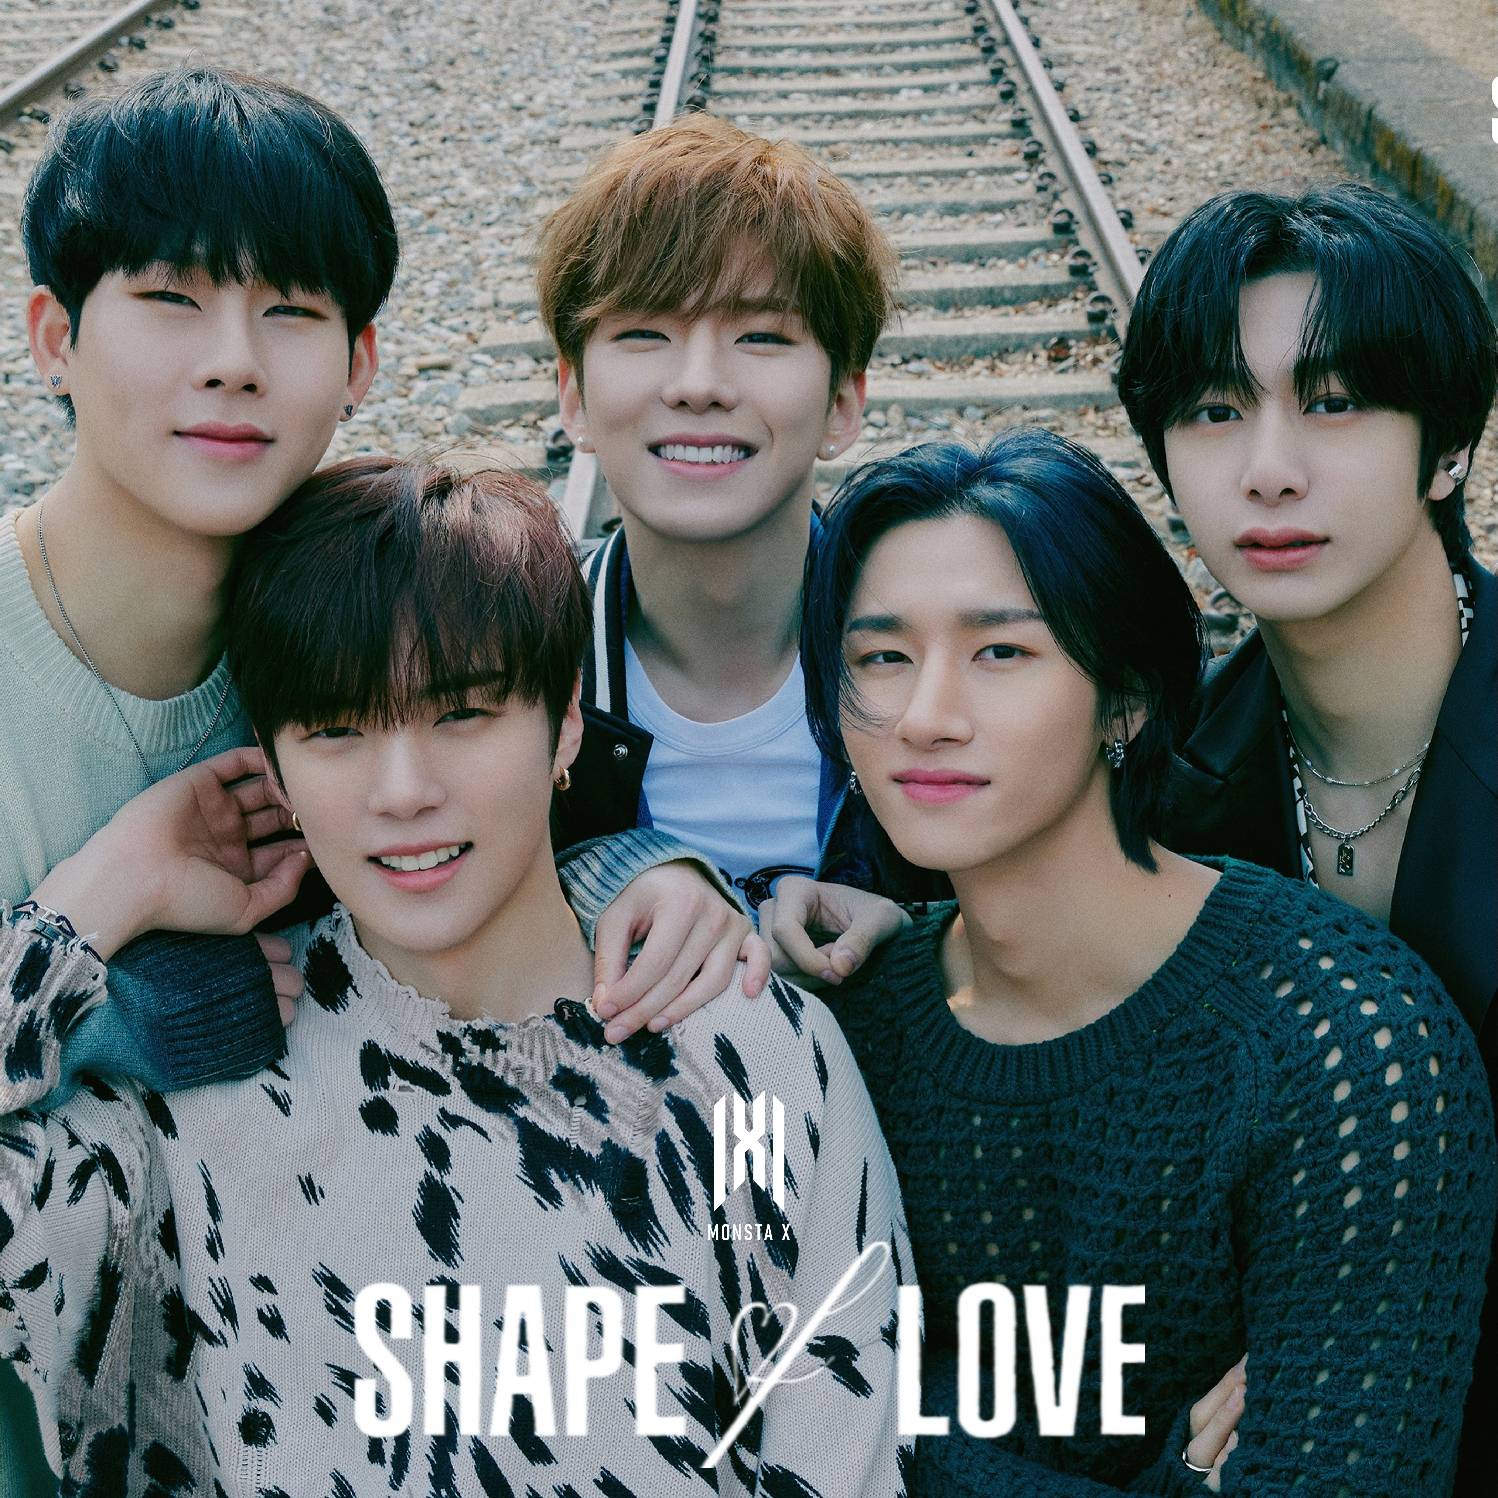 MONSTA X - SHAPE OF LOVE (ALBUM COVER) by Kyliemaine on DeviantArt